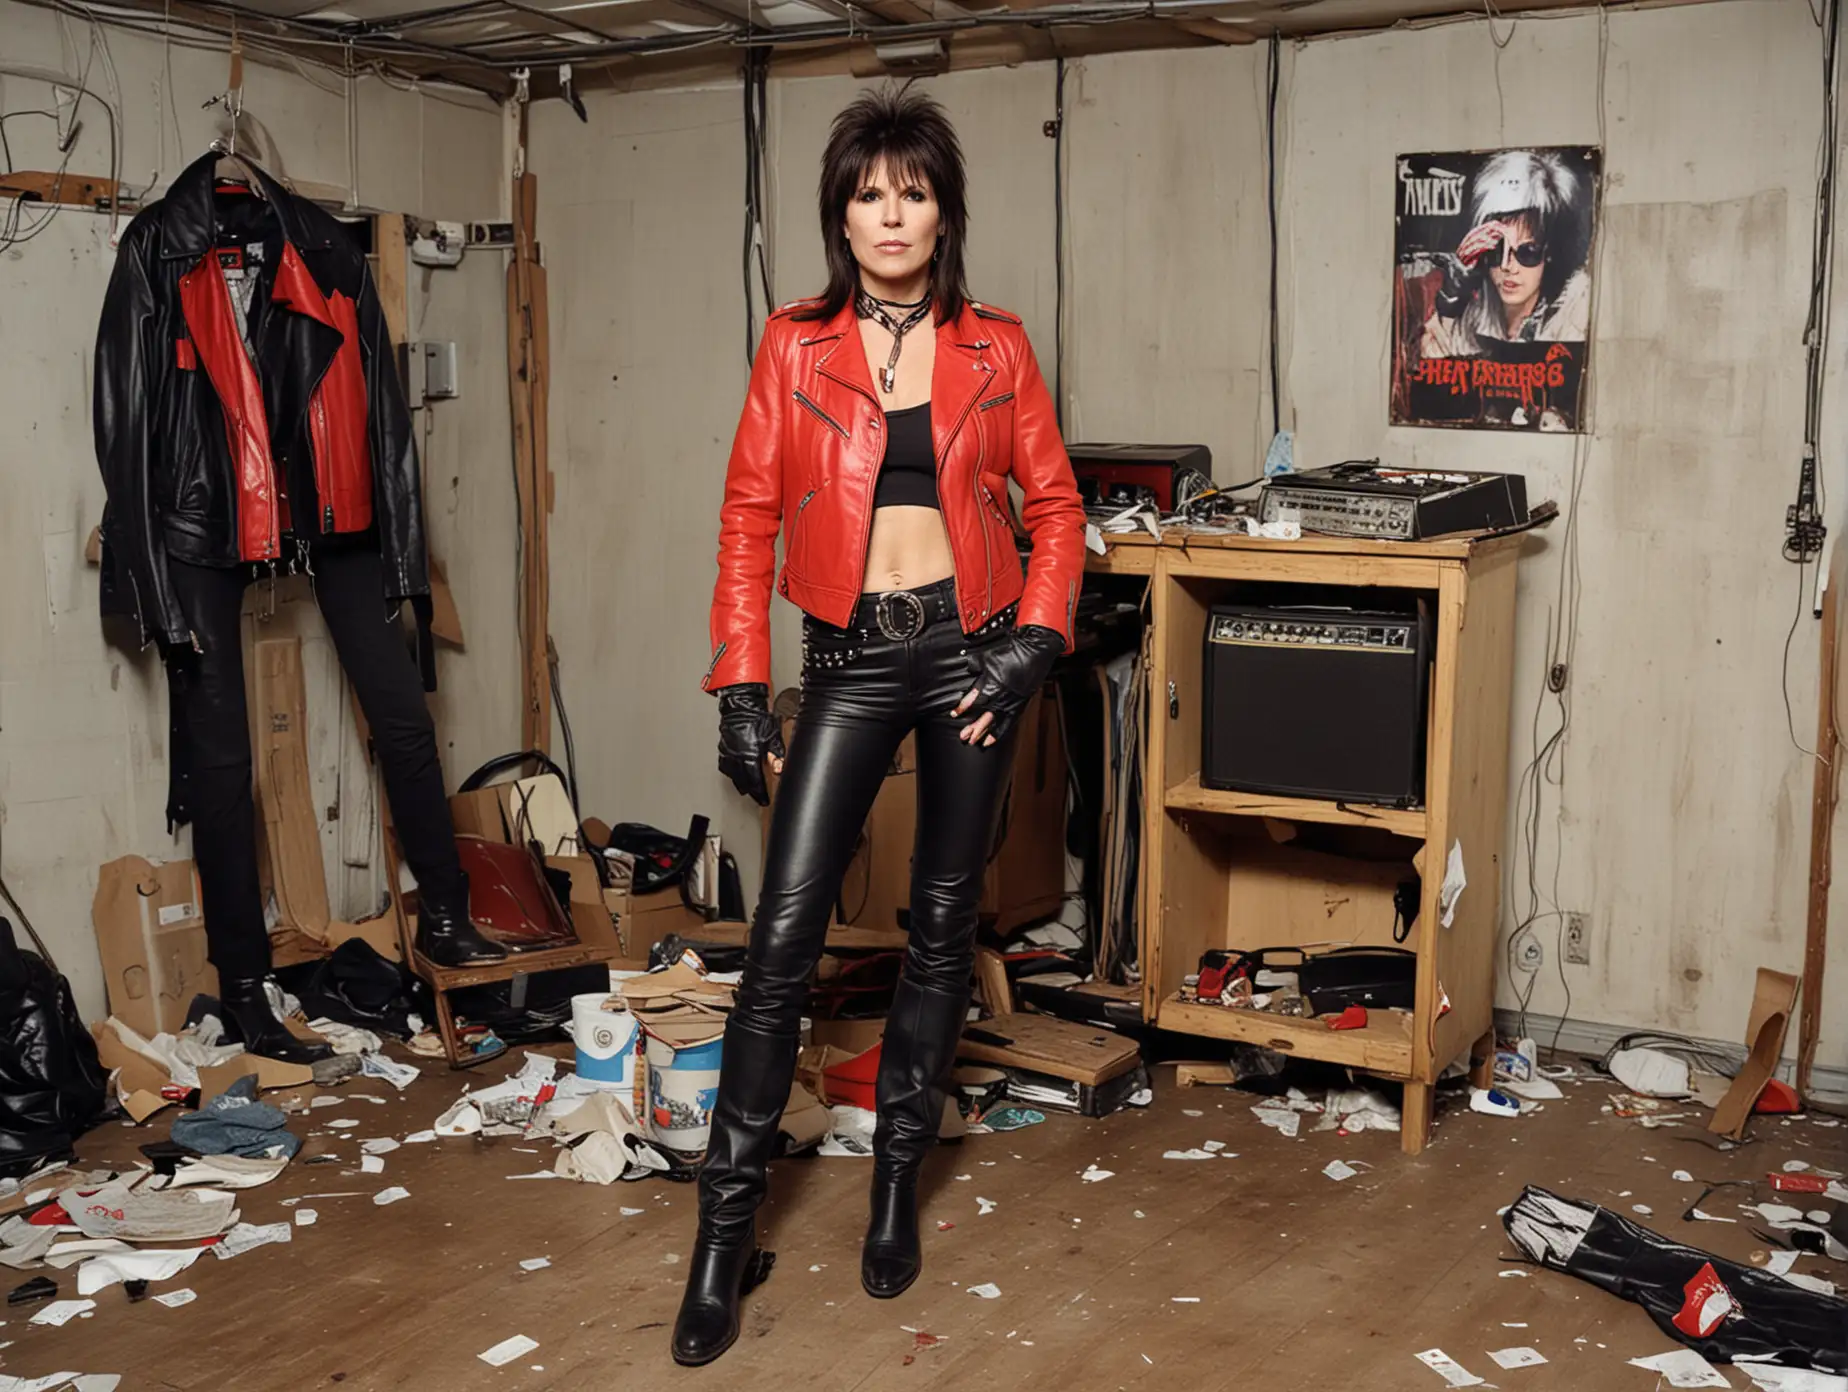 a full view of a busty, drunk, 70s rocker Chrissie Hynde of The Pretenders wearing a zipped-up, fastened red leather jacket, black leather pants, red leather boots, black leather gloves standing in a trashed backstage dressing room